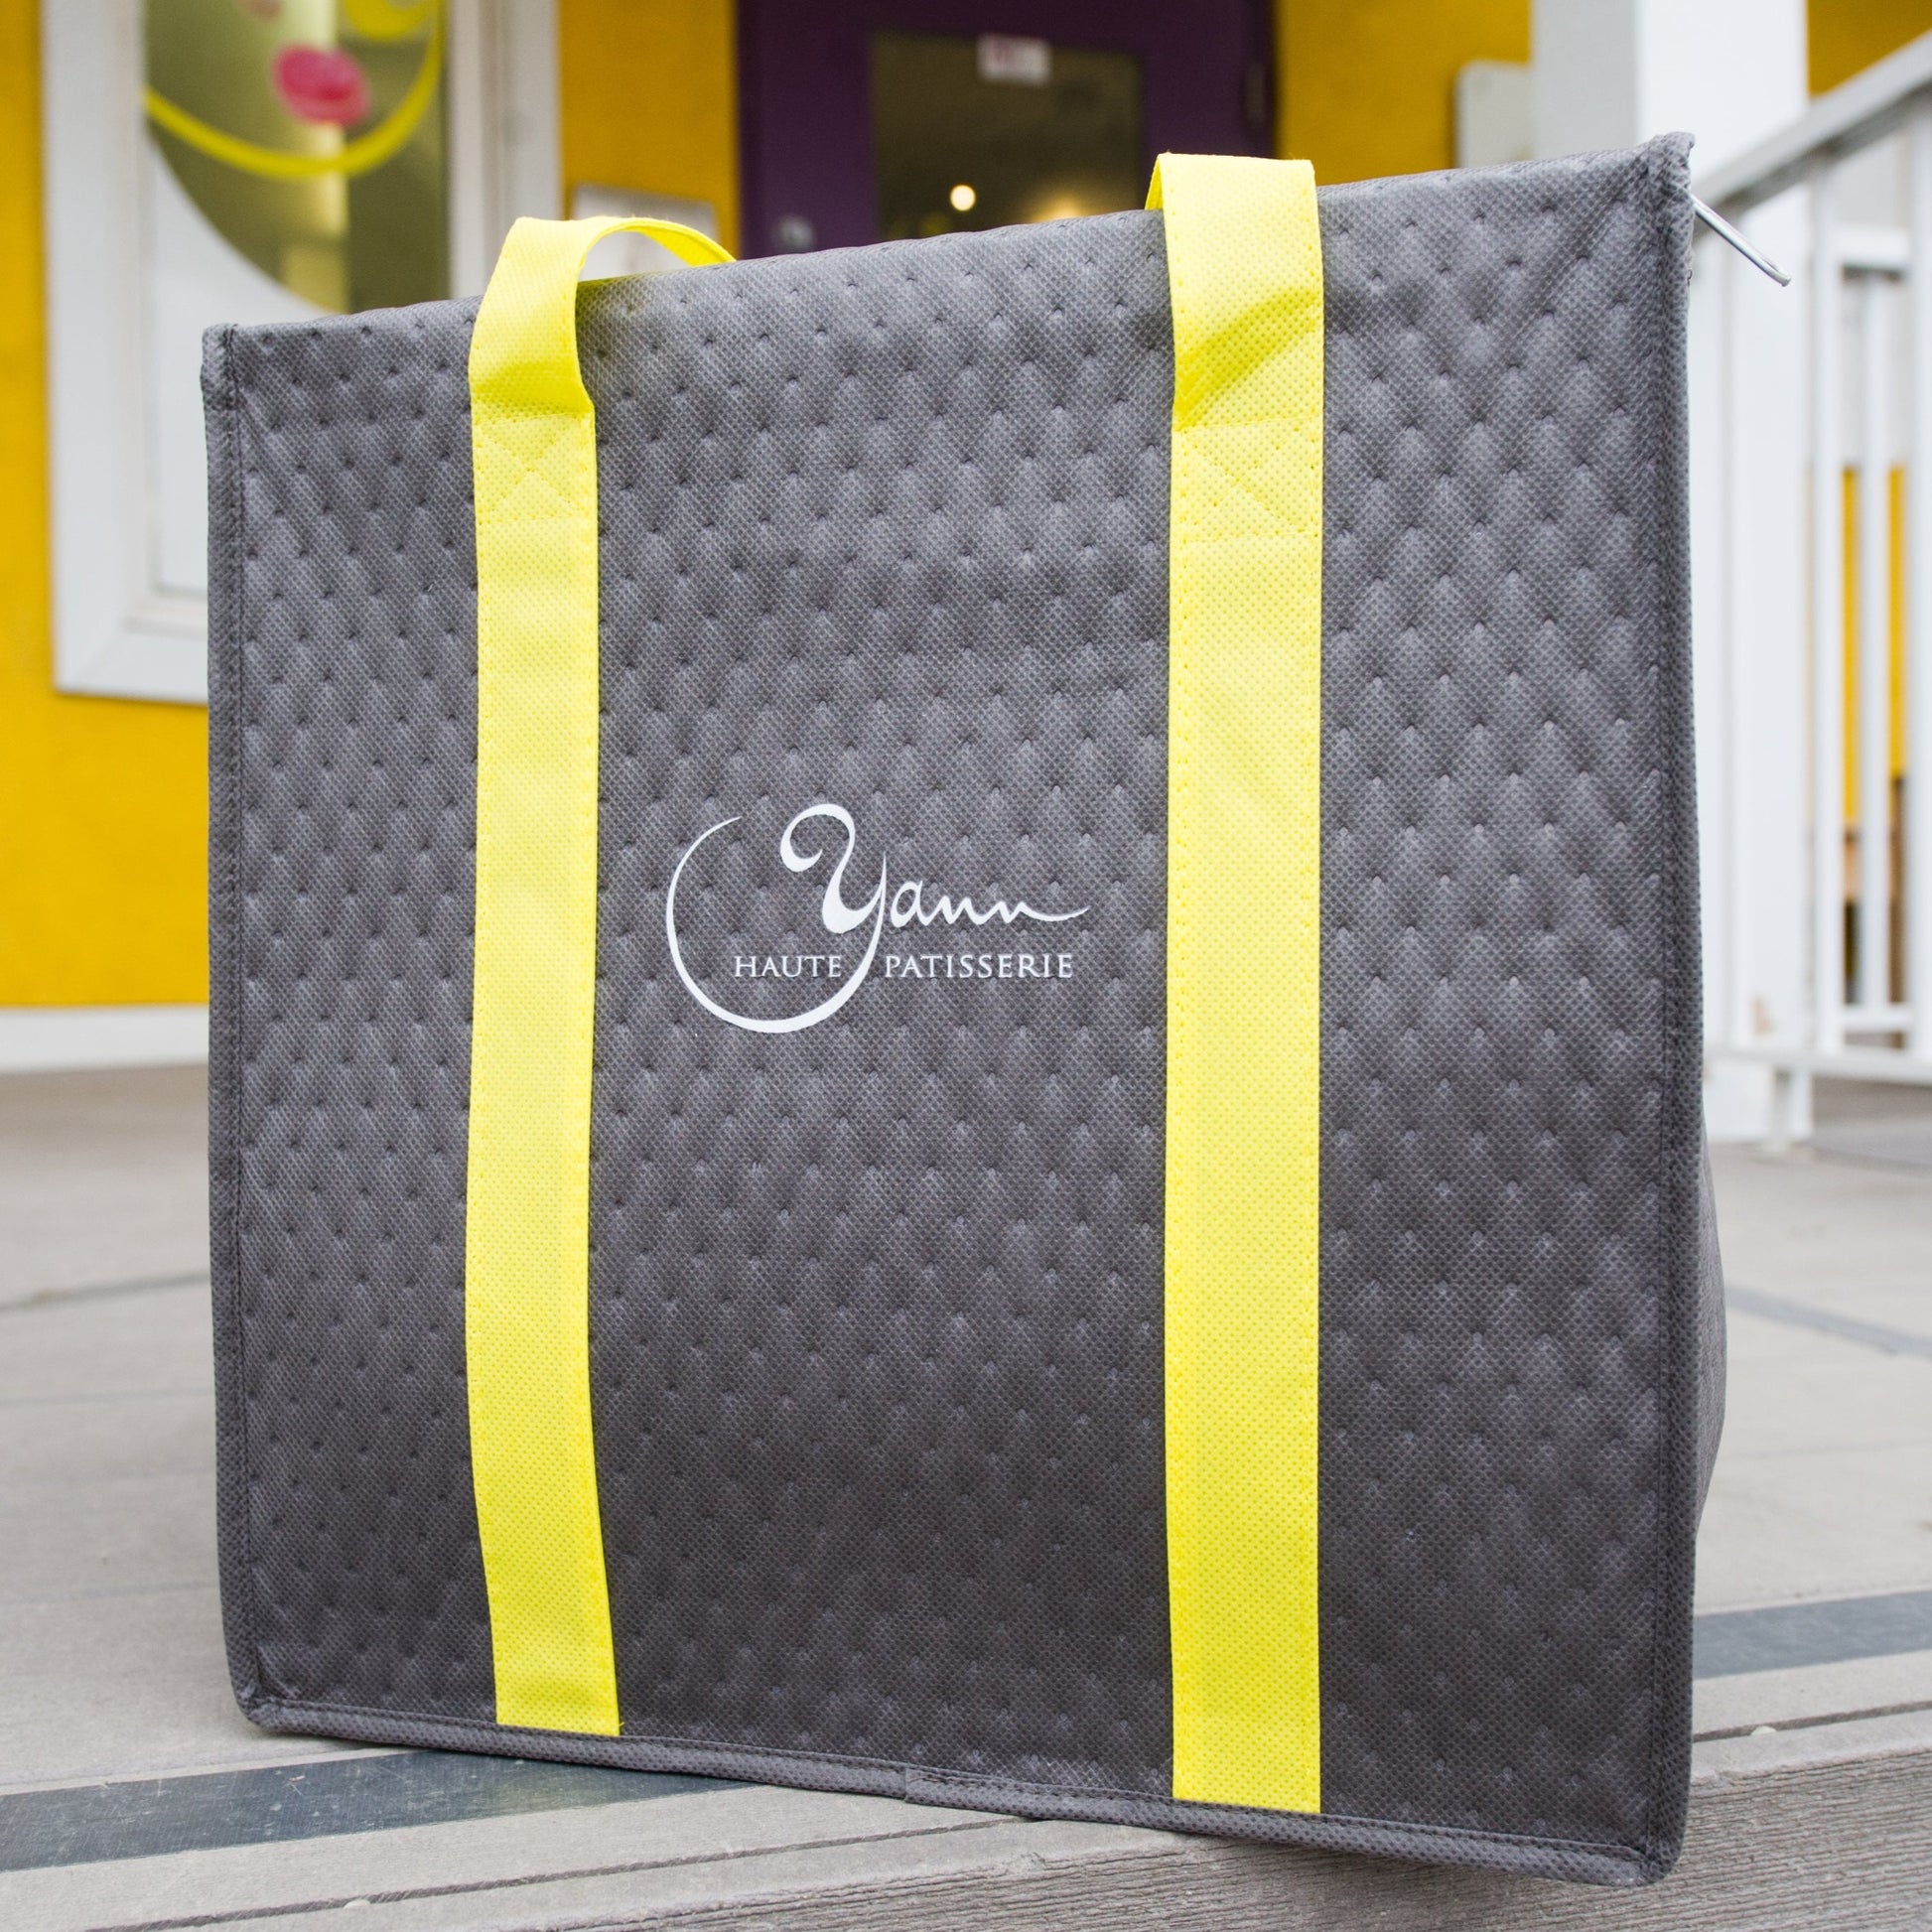 Thermal insulated bag perfect for our forzen to oven croissants, pain au chocolat, bread and brioche. Yann Haute Patisserie authentic French bakery for the best macarons, cakes, chocolate, ice cream, bread from chef Yann Blanchard of the Relais Dessert association!